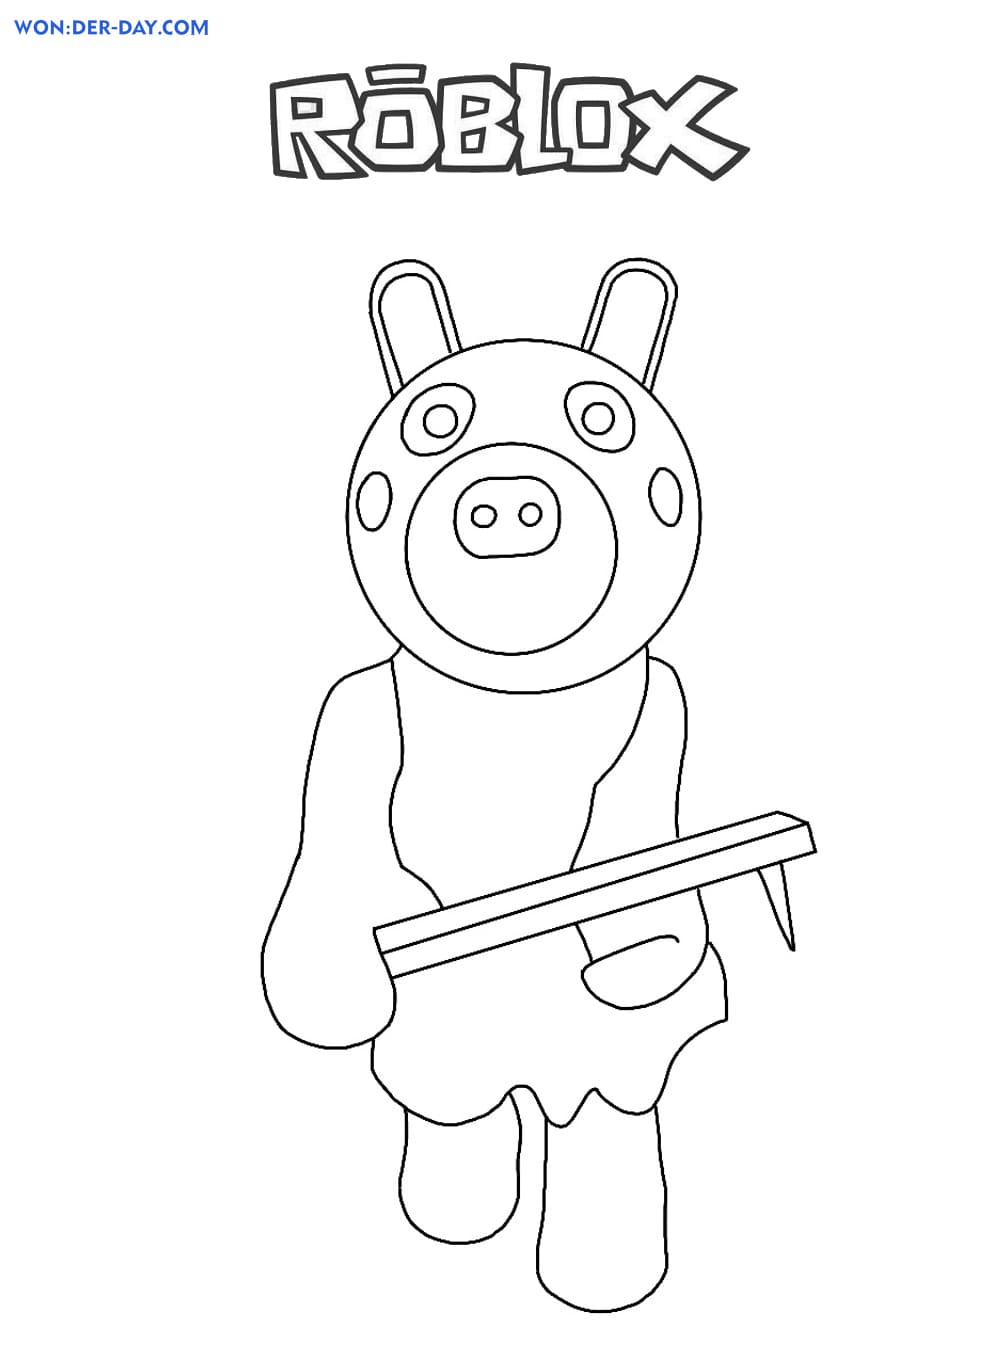 Badgey Piggy Roblox, roblox - Free PNG - PicMix